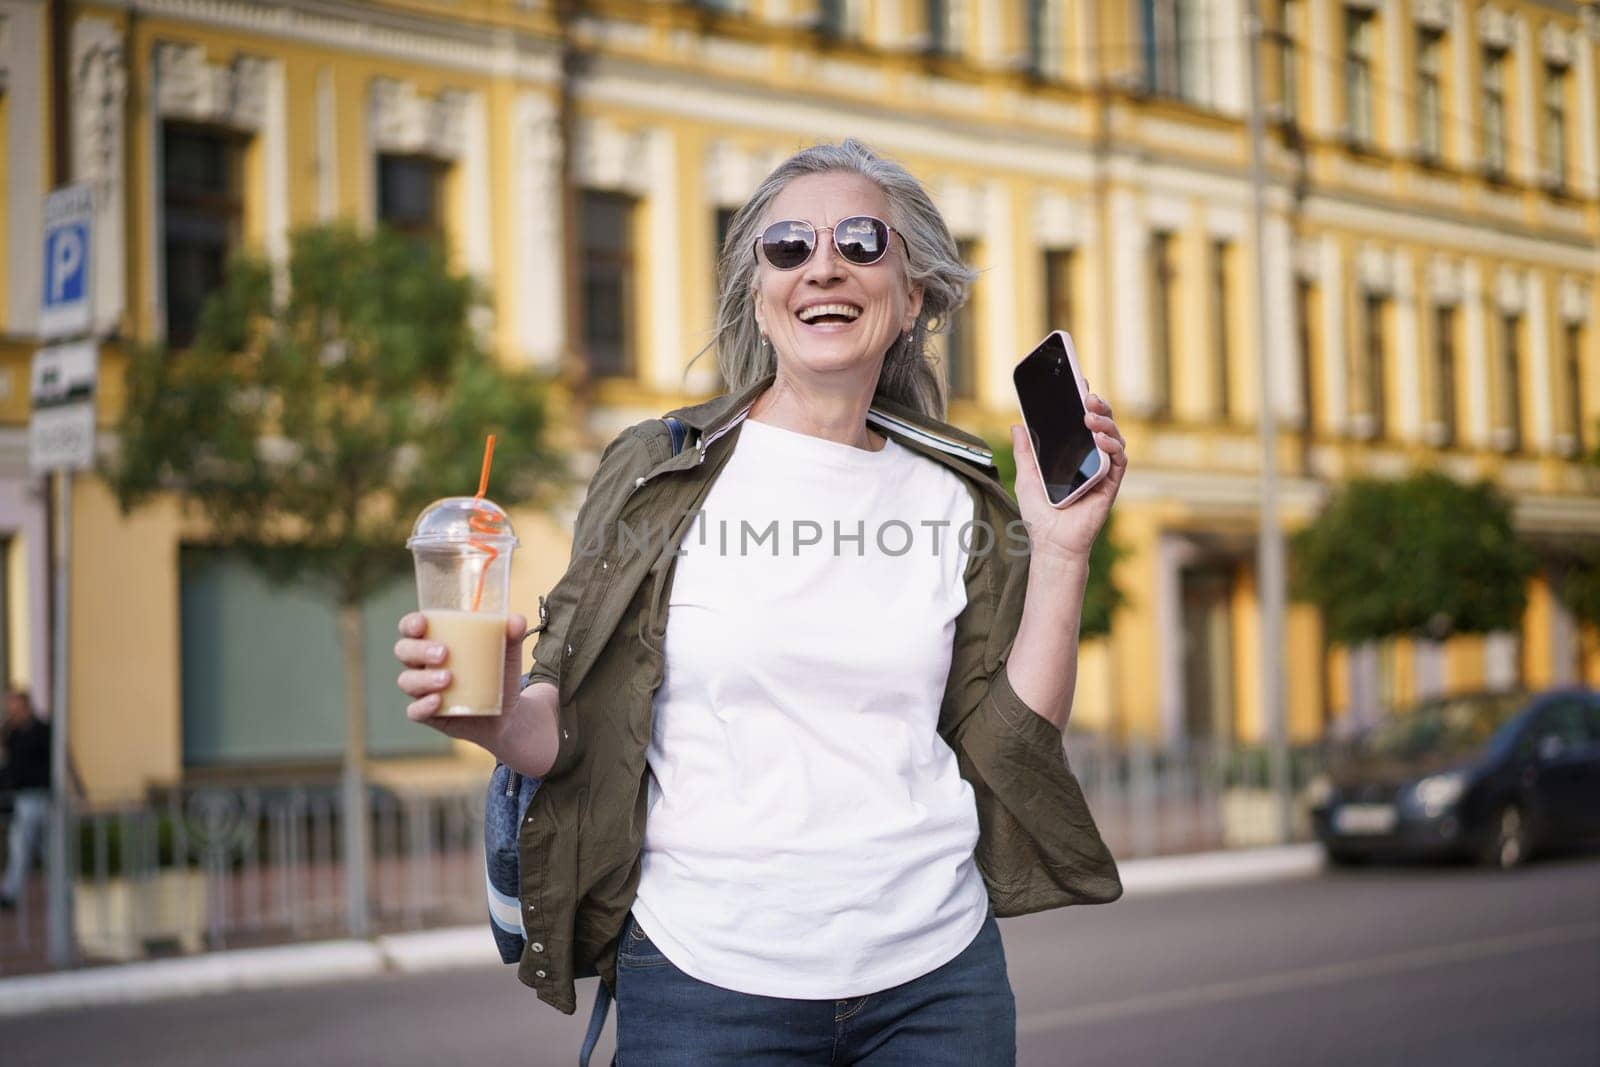 A Mature European Woman Enjoys Life Walking in The City. Biohacking Concept. Mature gray-haired modern european woman walks around the city in sunglasses, holding a mobile phone and a drink with a straw. High quality photo.